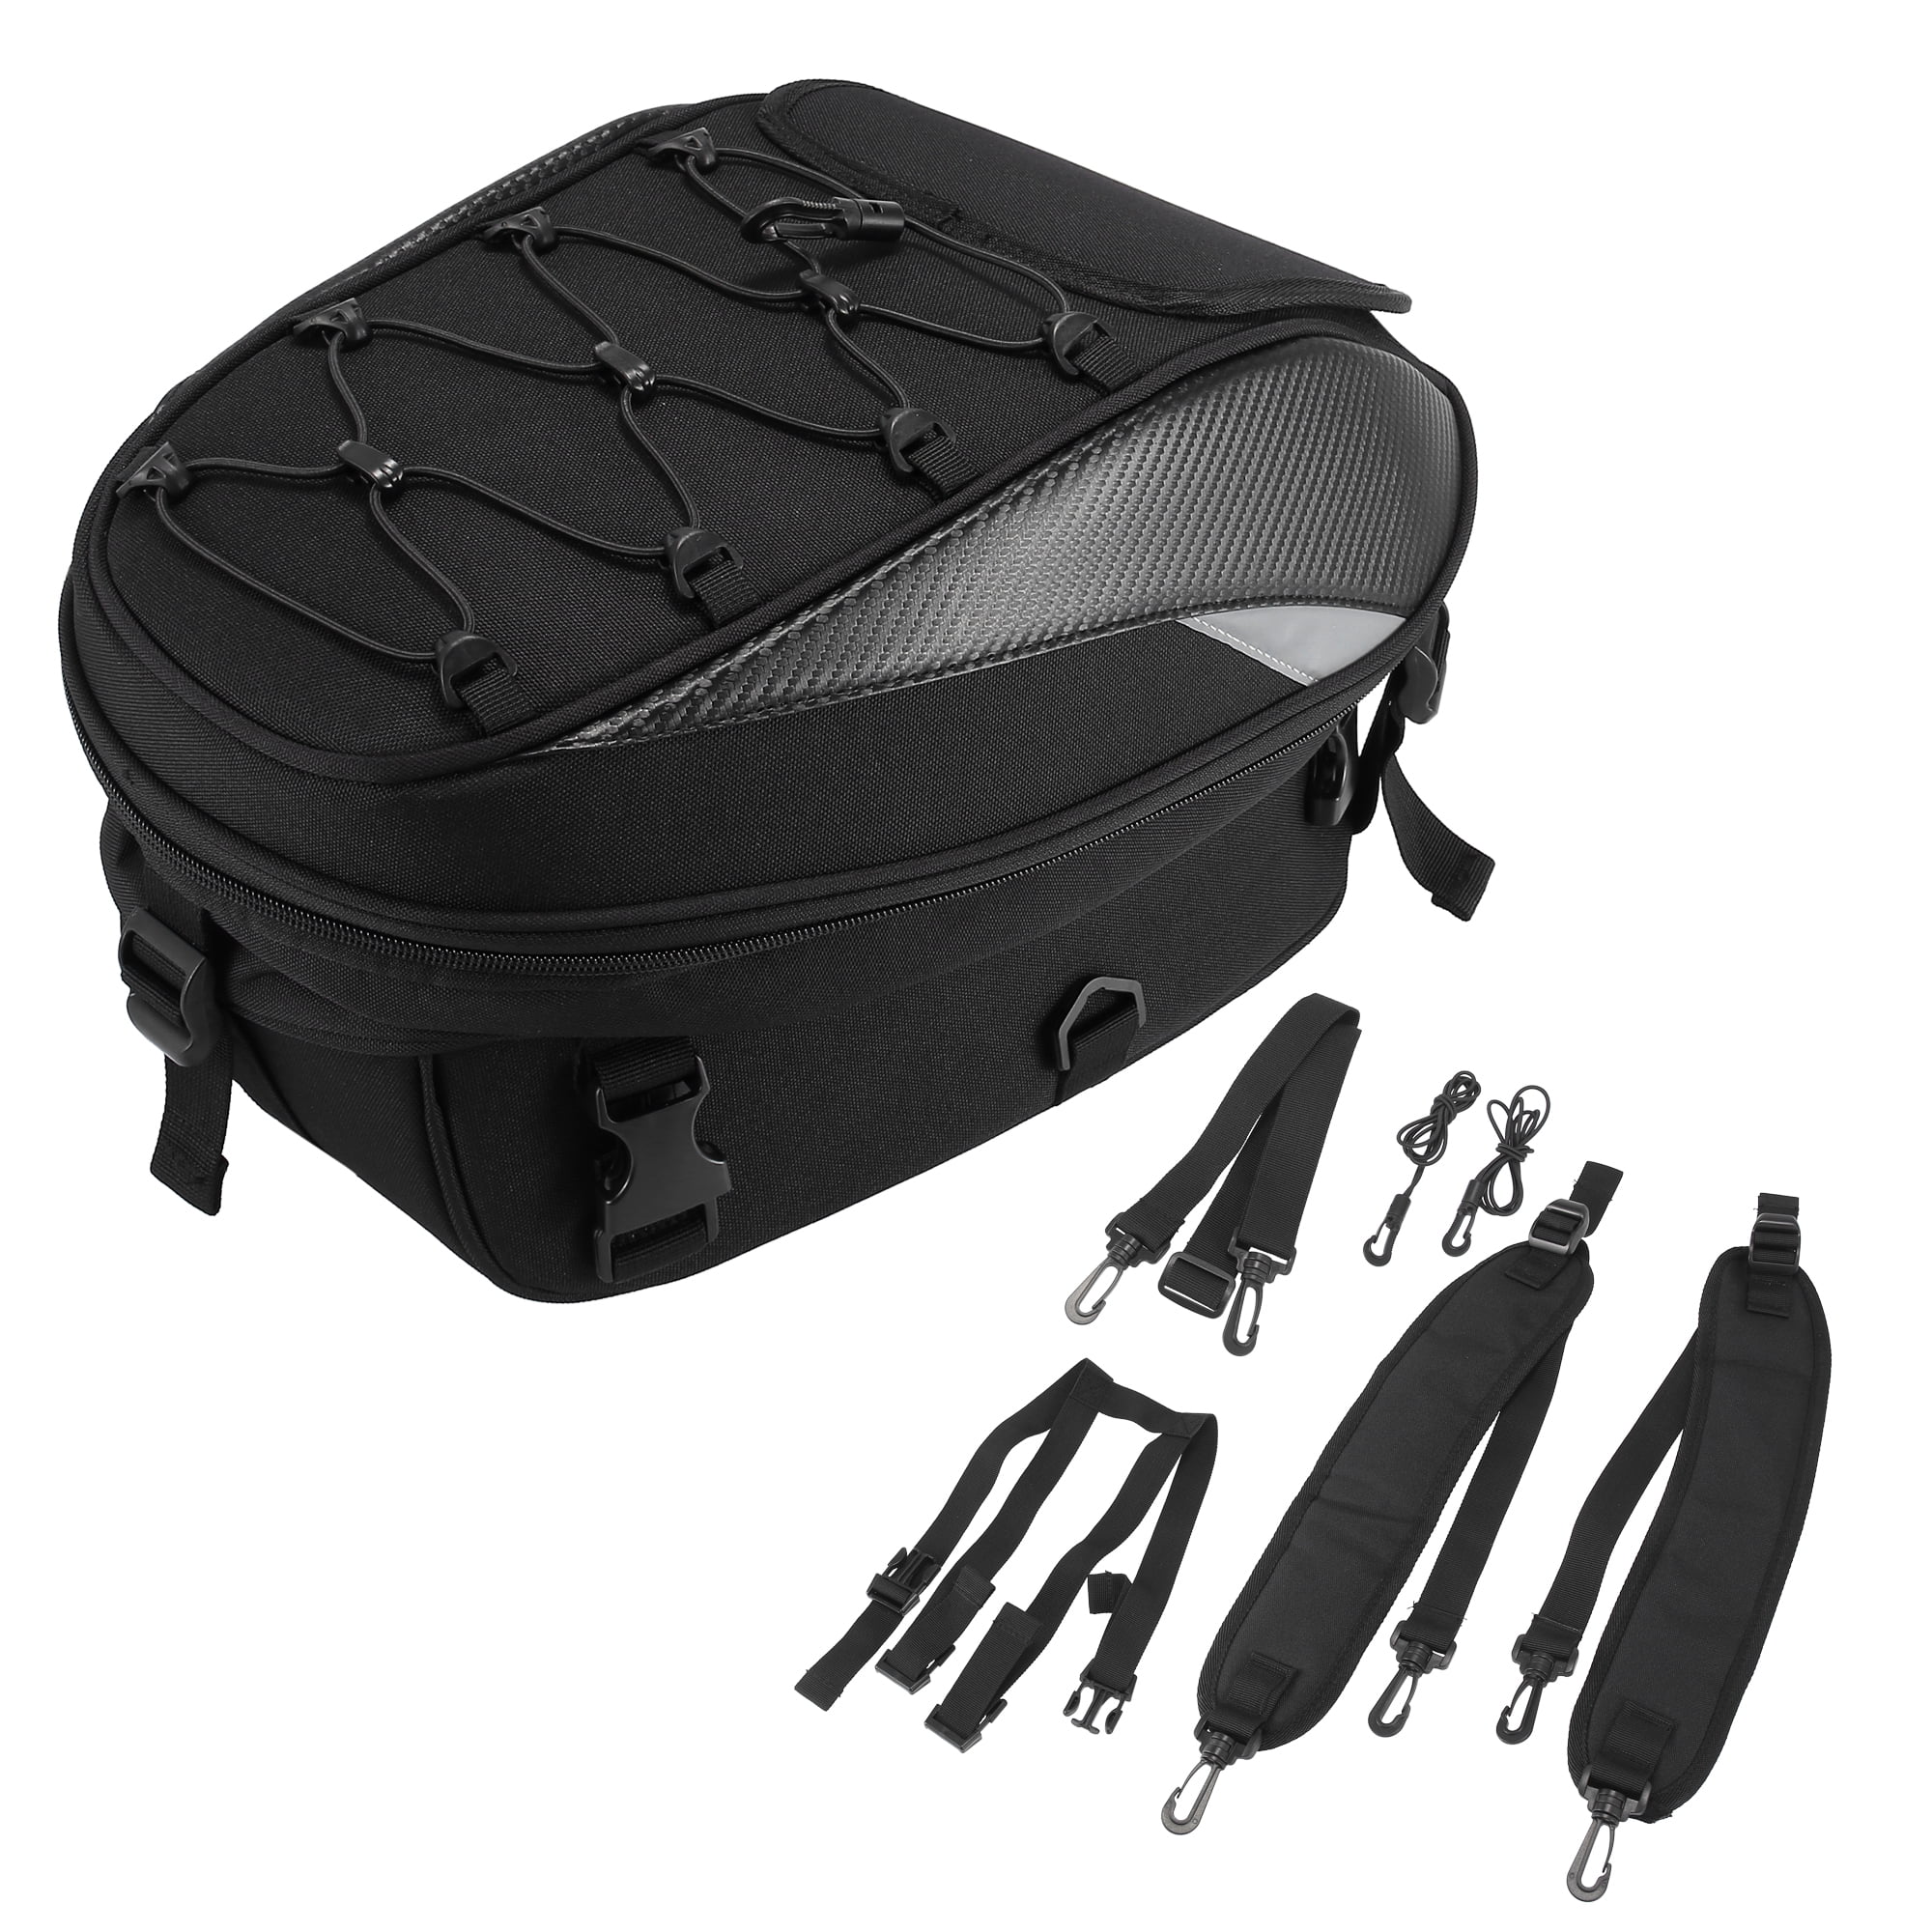 Shiwaki Motorcycle Tail Bag PU Leather Multifunctional Waterproof Sports Seatback Seat Tool Bags Luggage Carry Pack Tank Pouch black Hard Shell